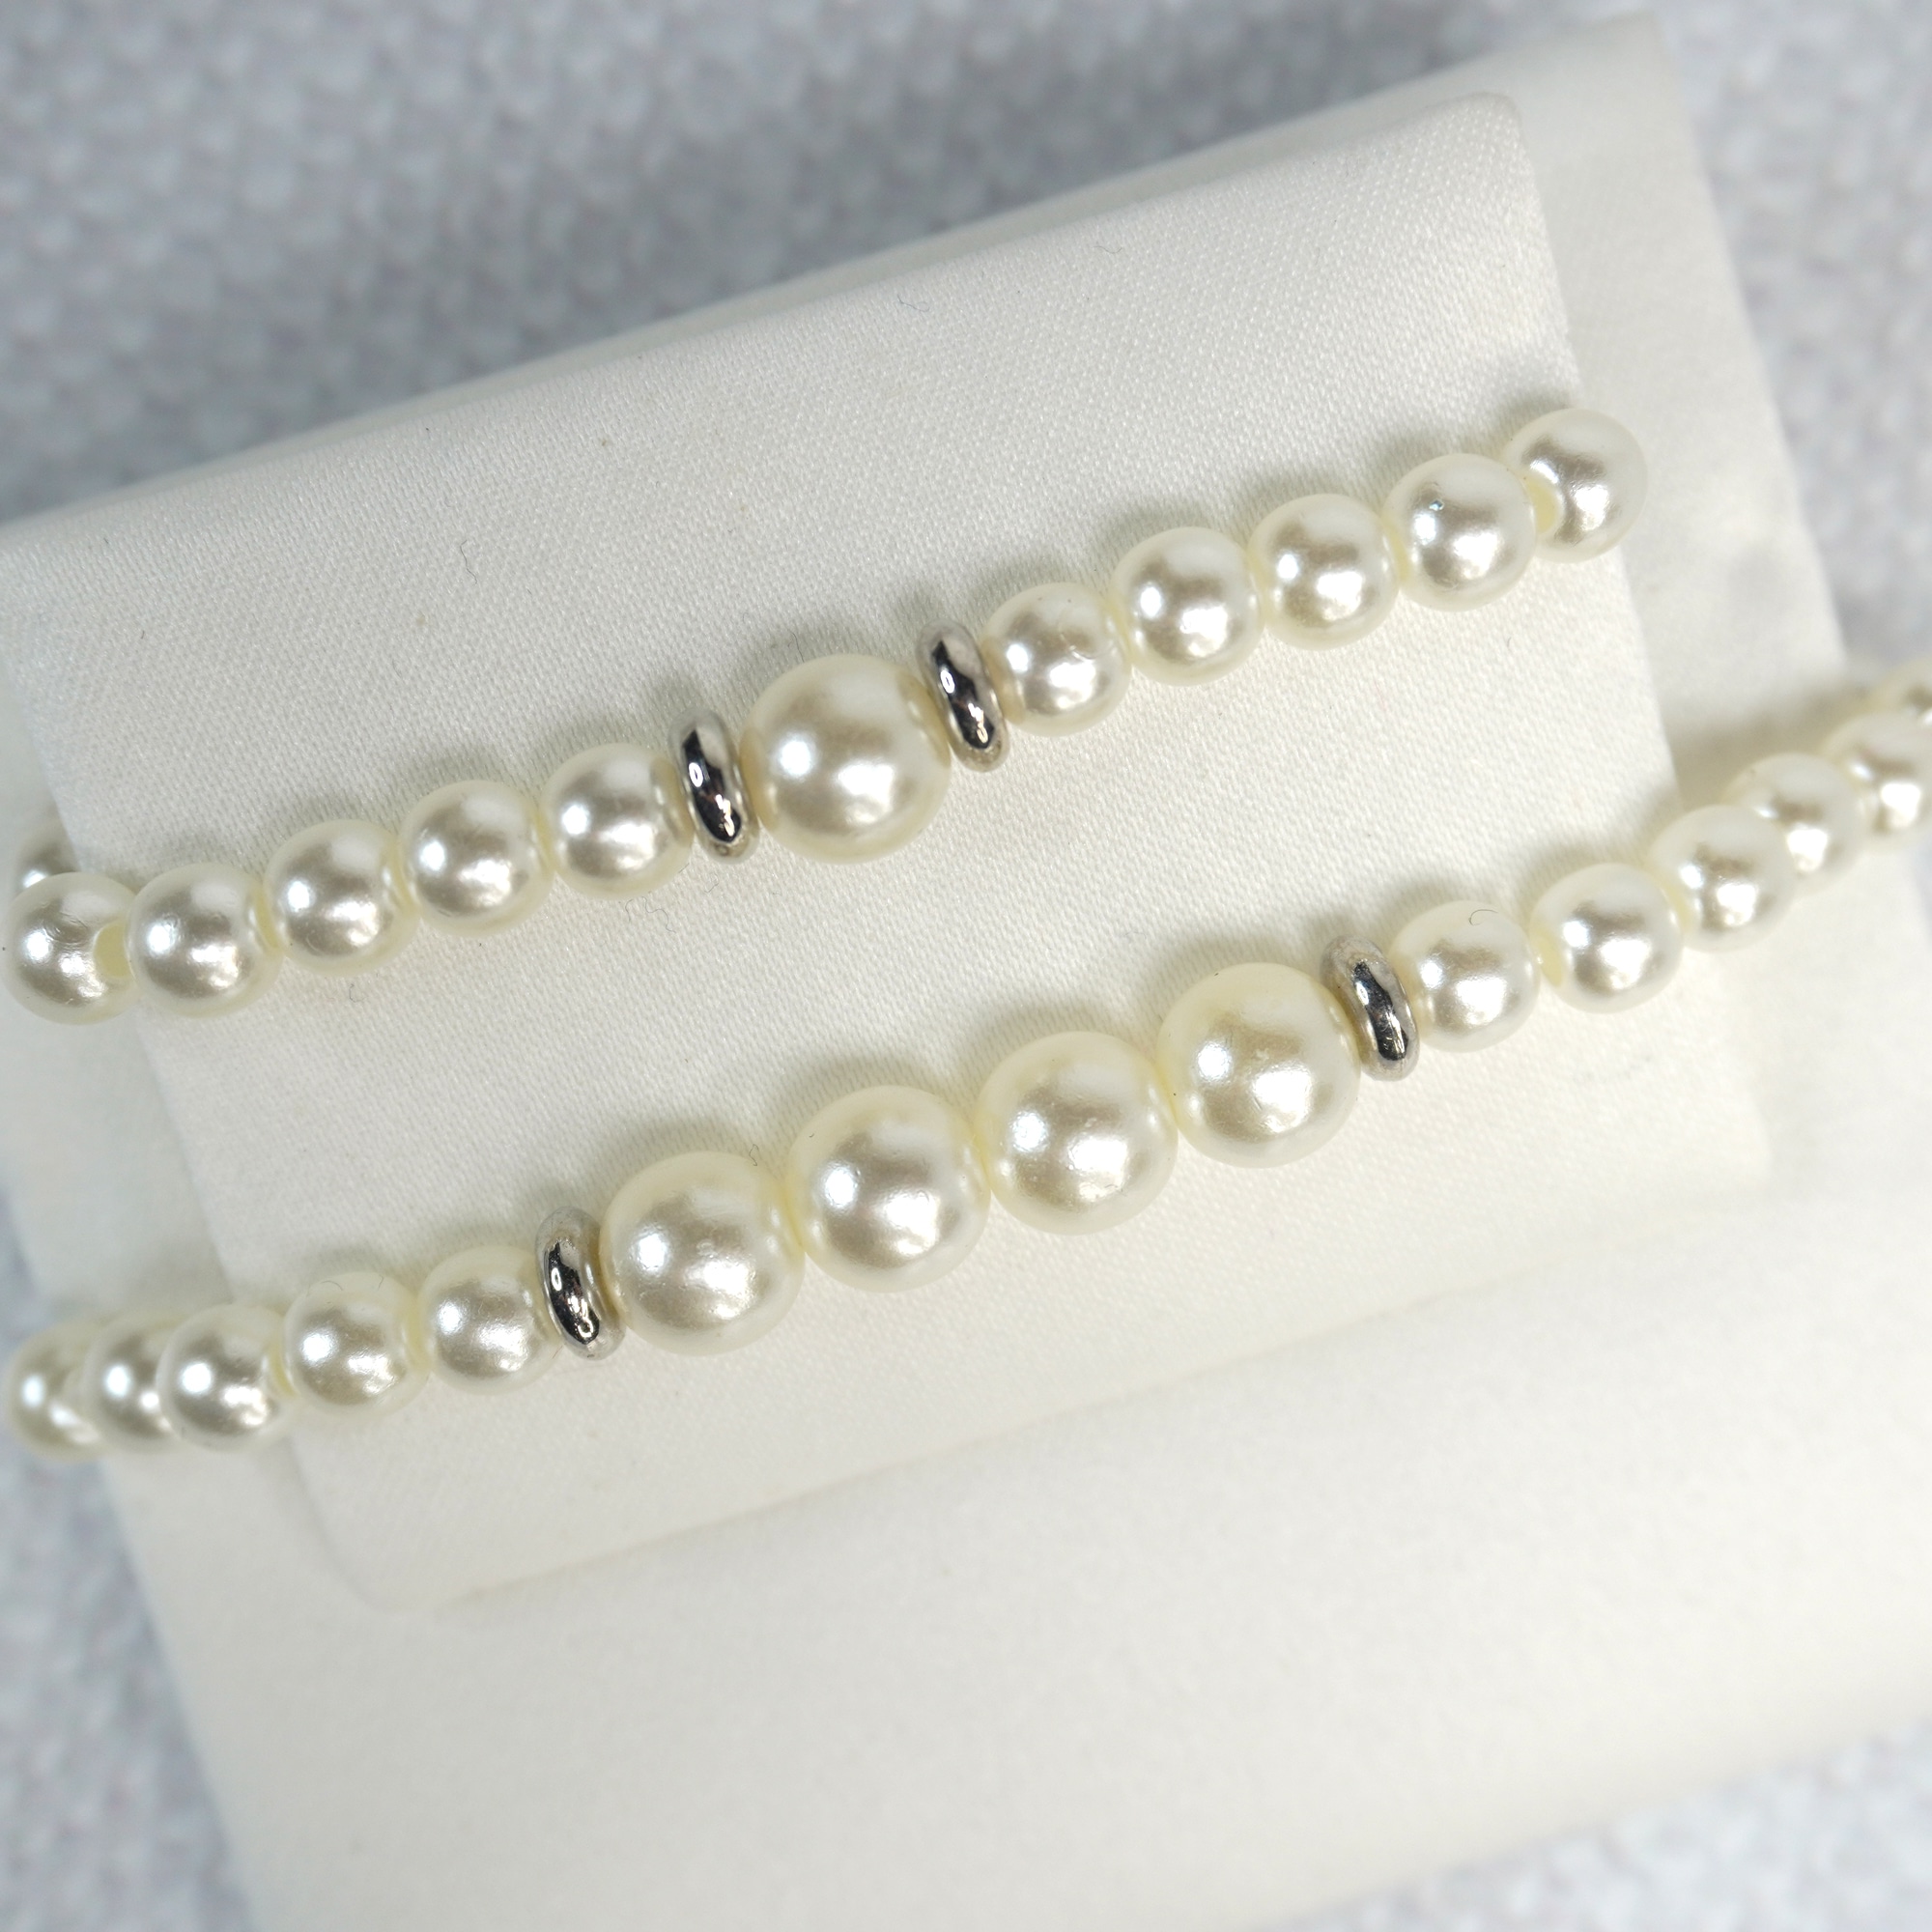 Mother and Daughter Bracelet Set White Pearls and Silver Spacer Beads - 8mm